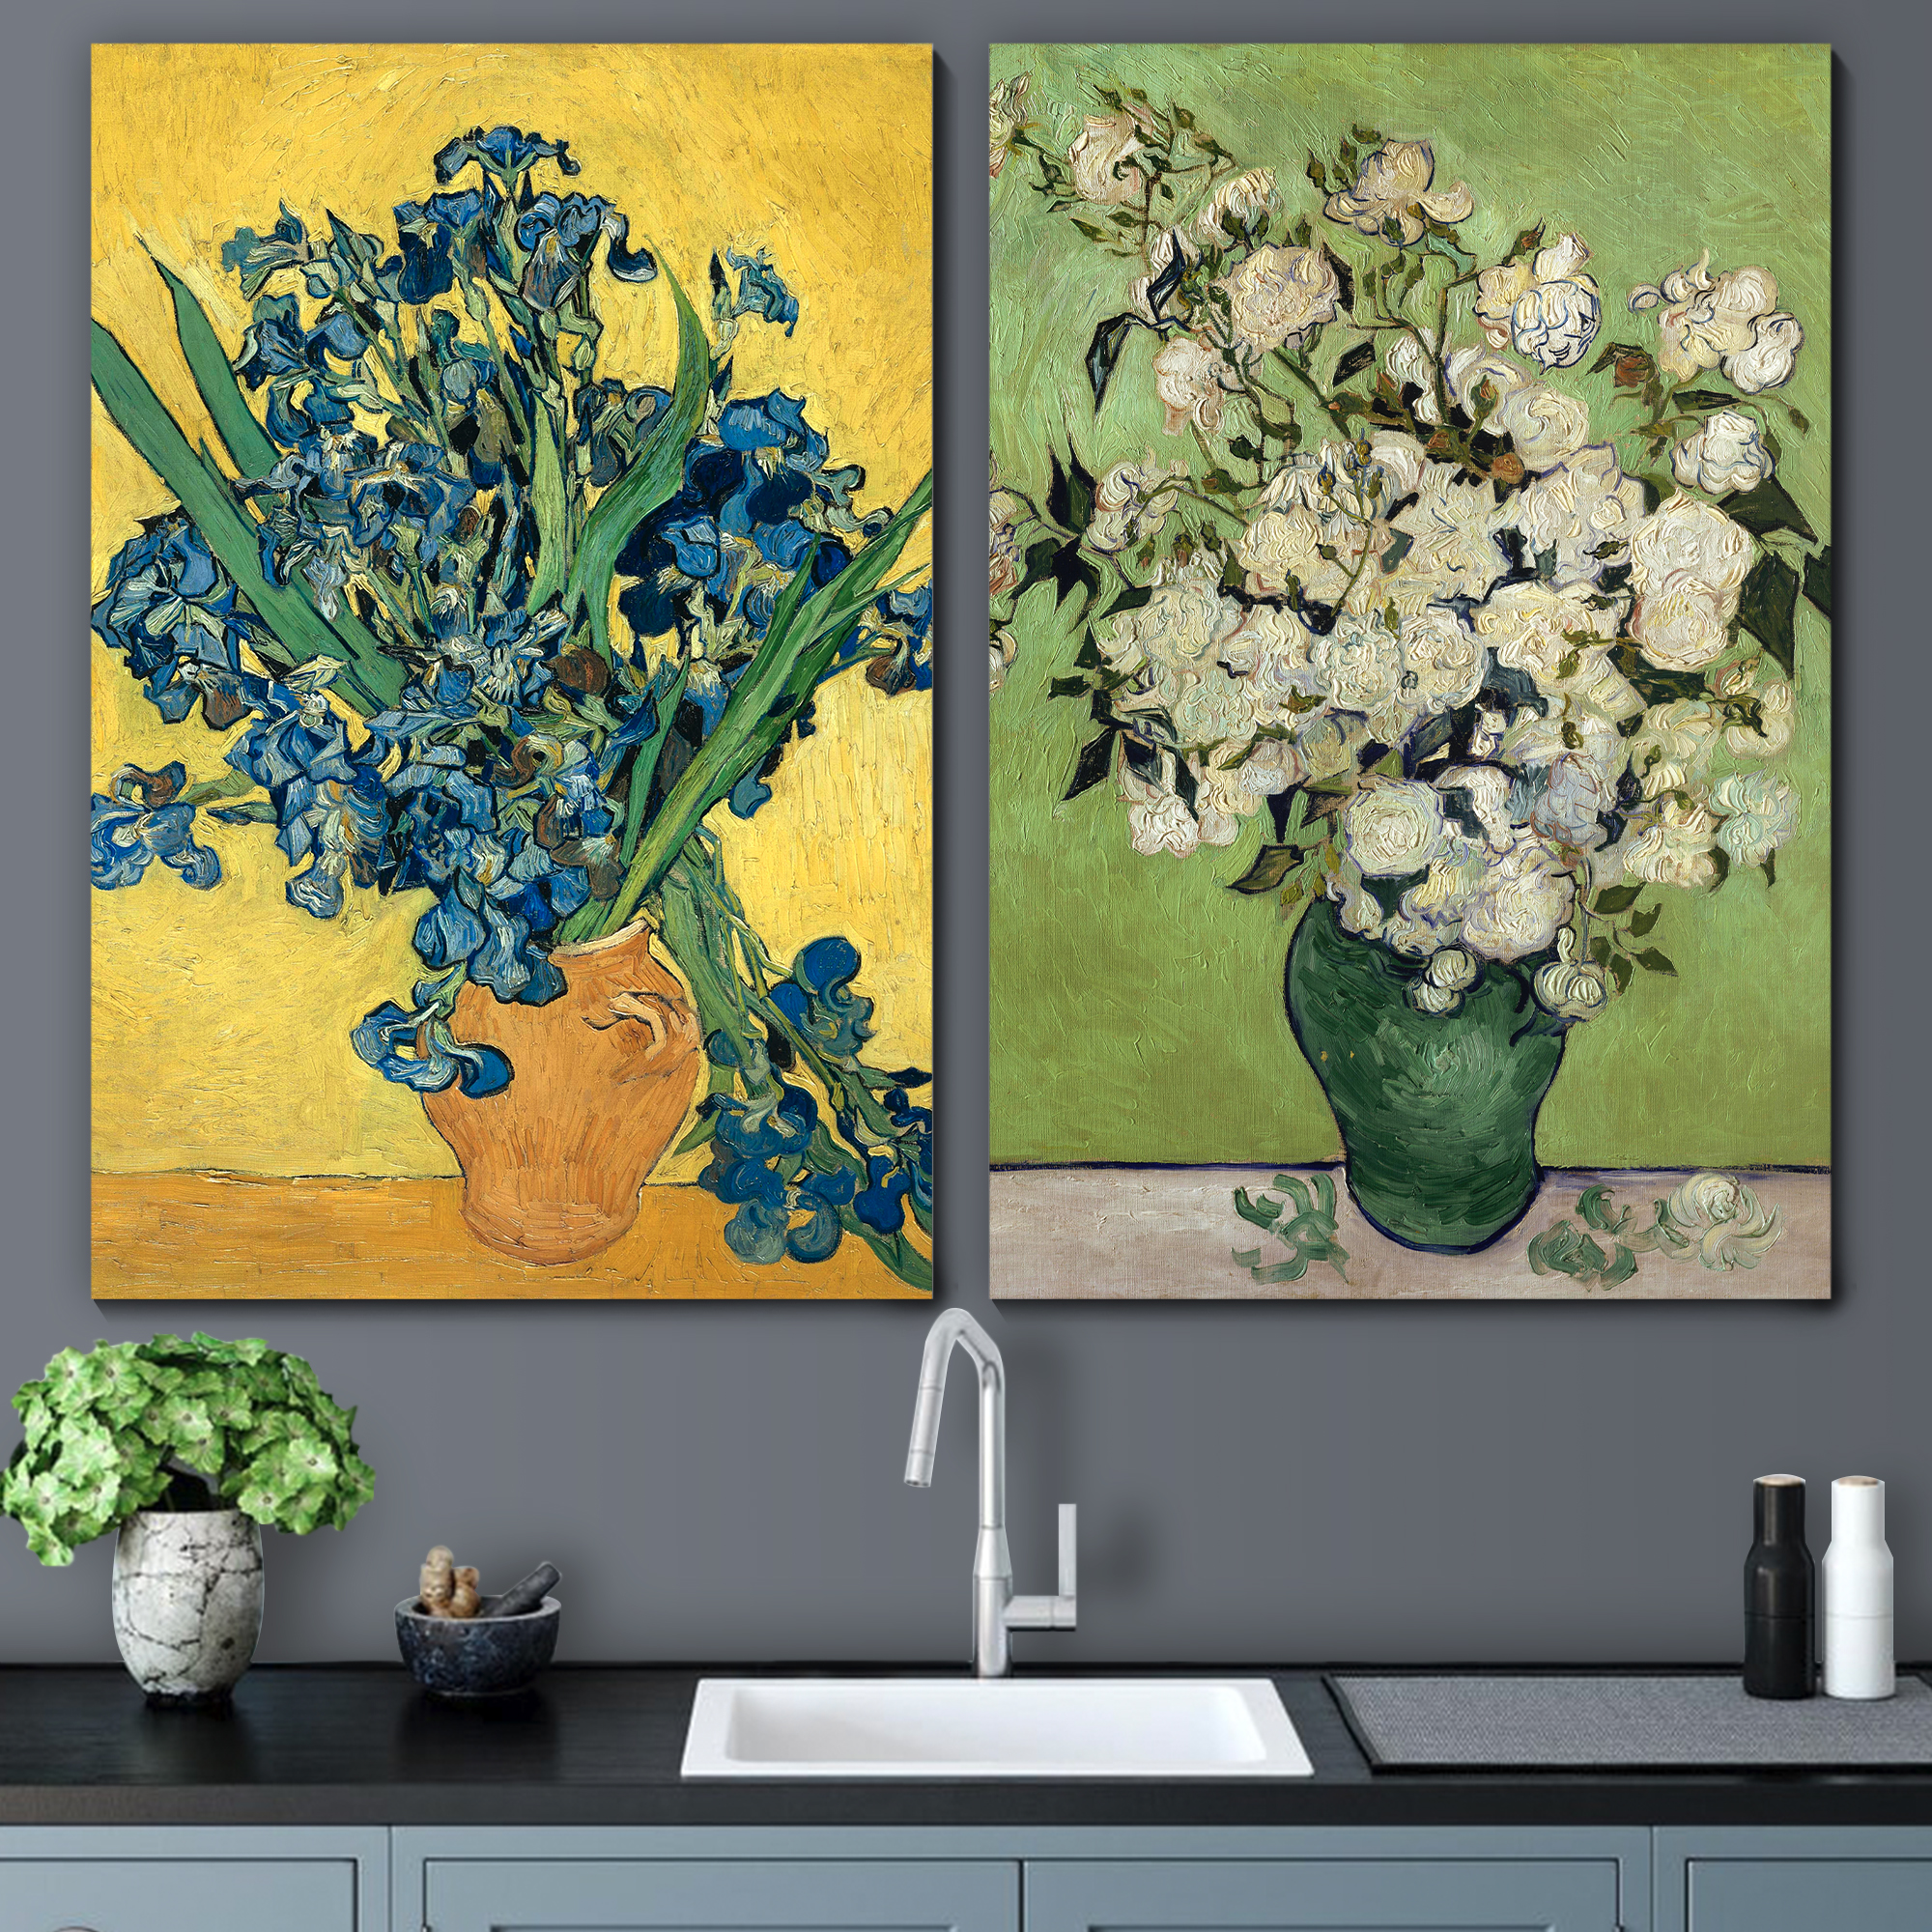 Wall26 - Still Life: Vase with Pink Roses/Irises by Vincent Van Gogh - Oil Painting Reproduction in Set of 2 | Canvas Prints Wall Art, Ready to Hang - 16